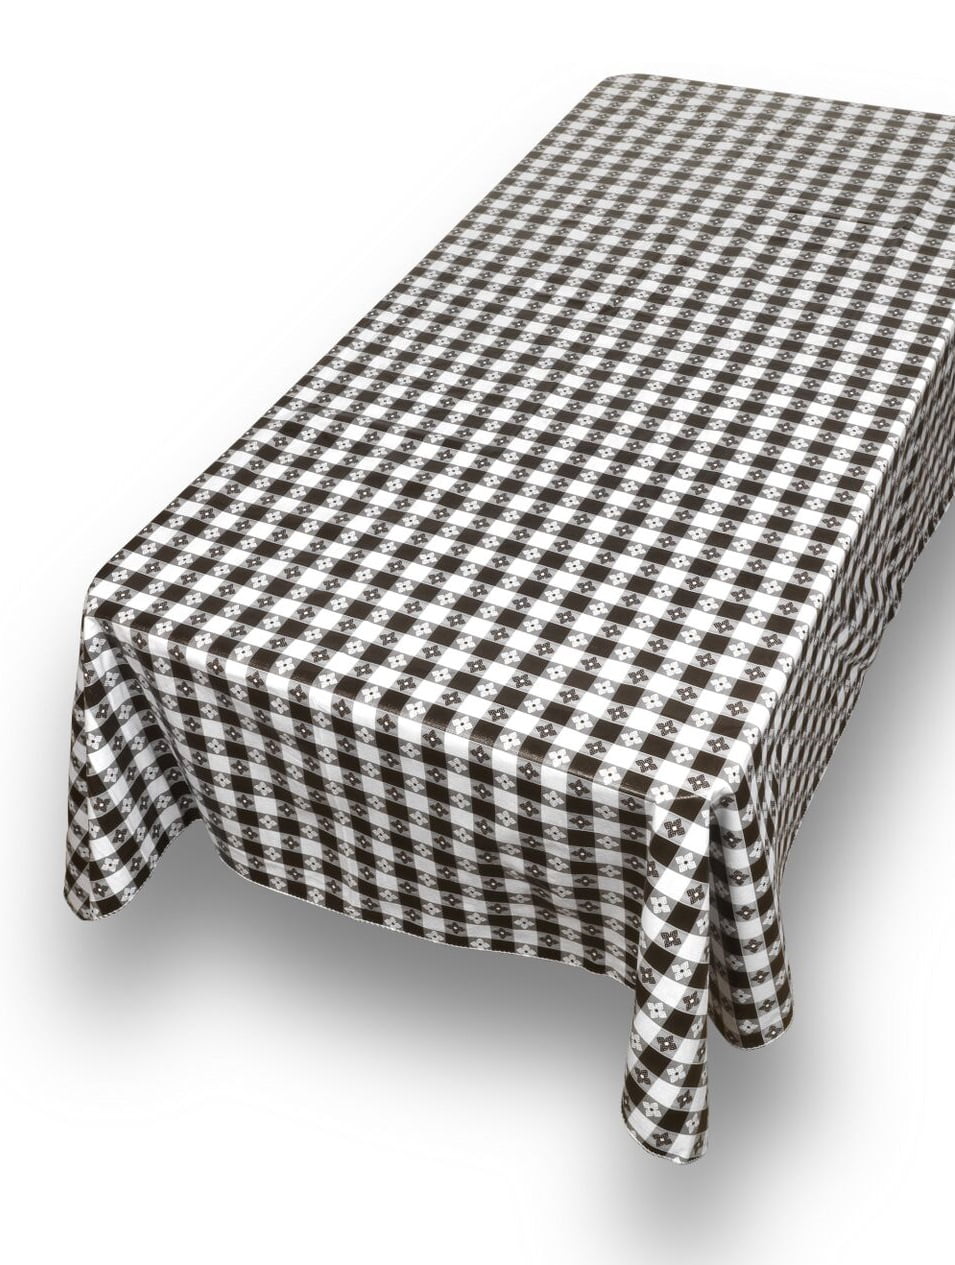 Houndstooth Glen Check Plaid Rectangle Tablecloth Picnic Tablecloth BBQ Table Cloths Polyester for Kitchen 54x72 Inch